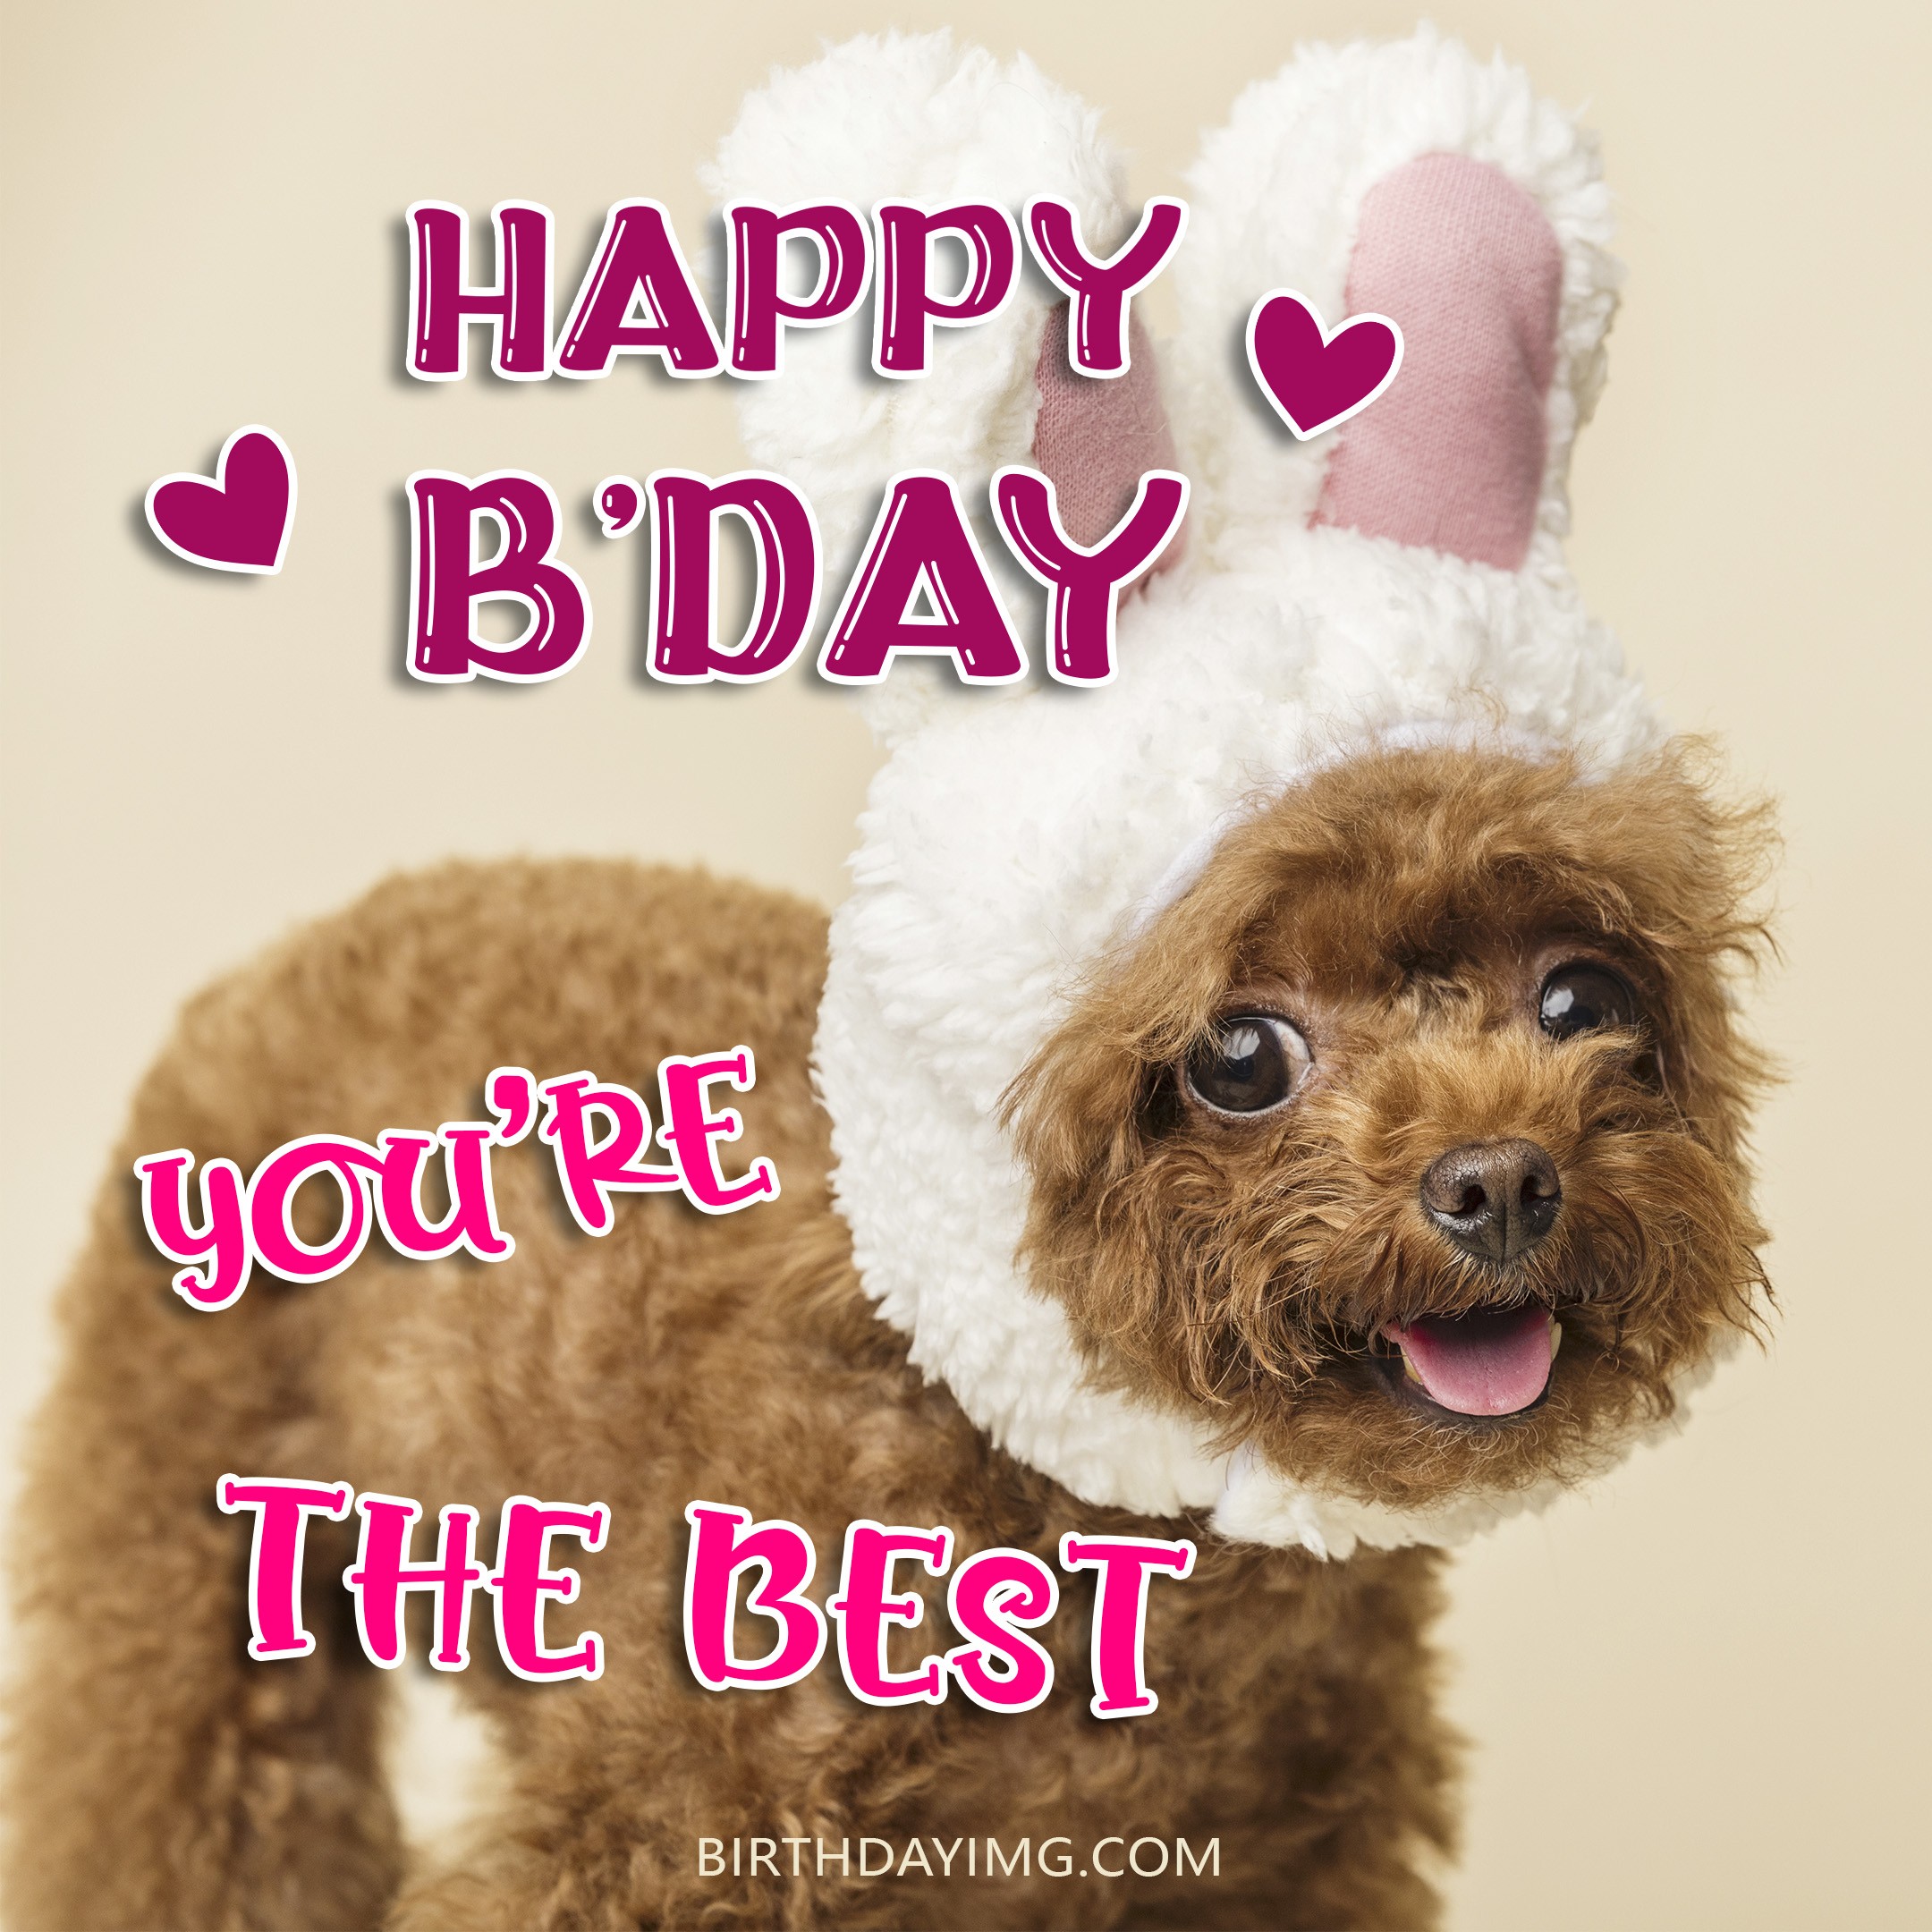 Free Funny Happy Birthday Image For Her (Woman) With Cute Dog - birthdayimg.com